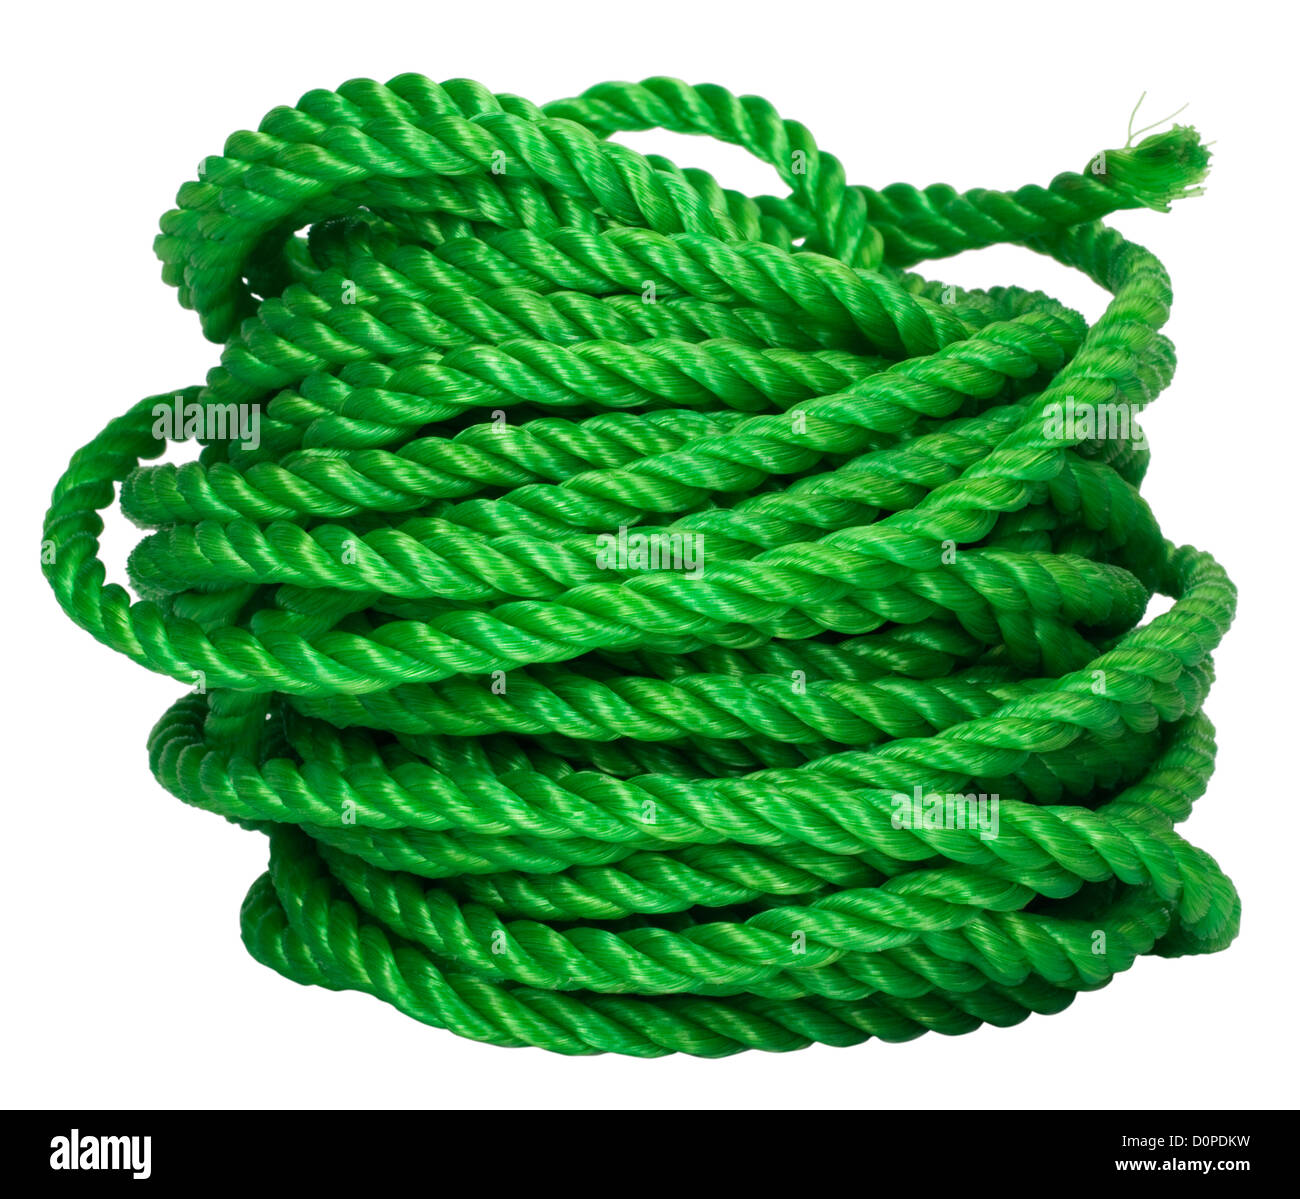 Blue Plastic Rope Isolated on White Background.Plastic String is Stock  Photo - Image of pressure, object: 114676258